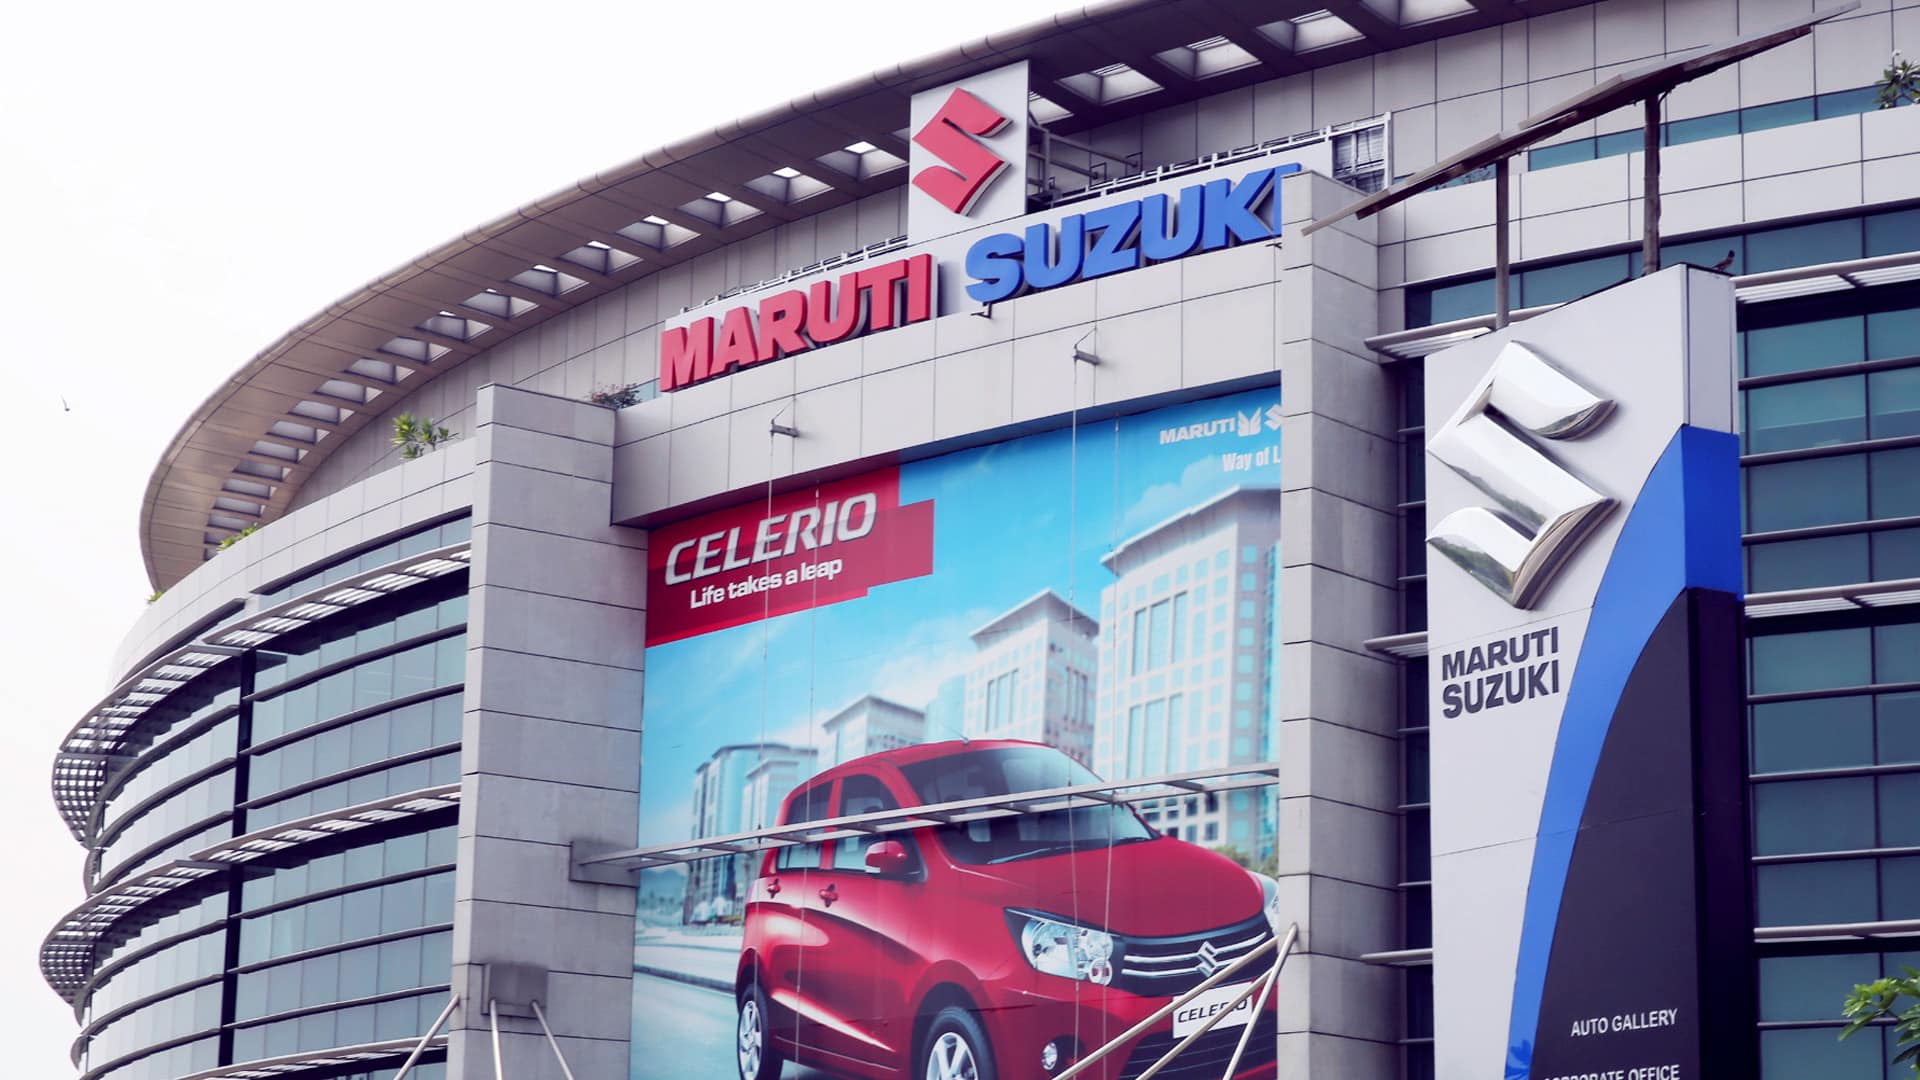 Not a right time to implement next stage of emission norms: Maruti Suzuki